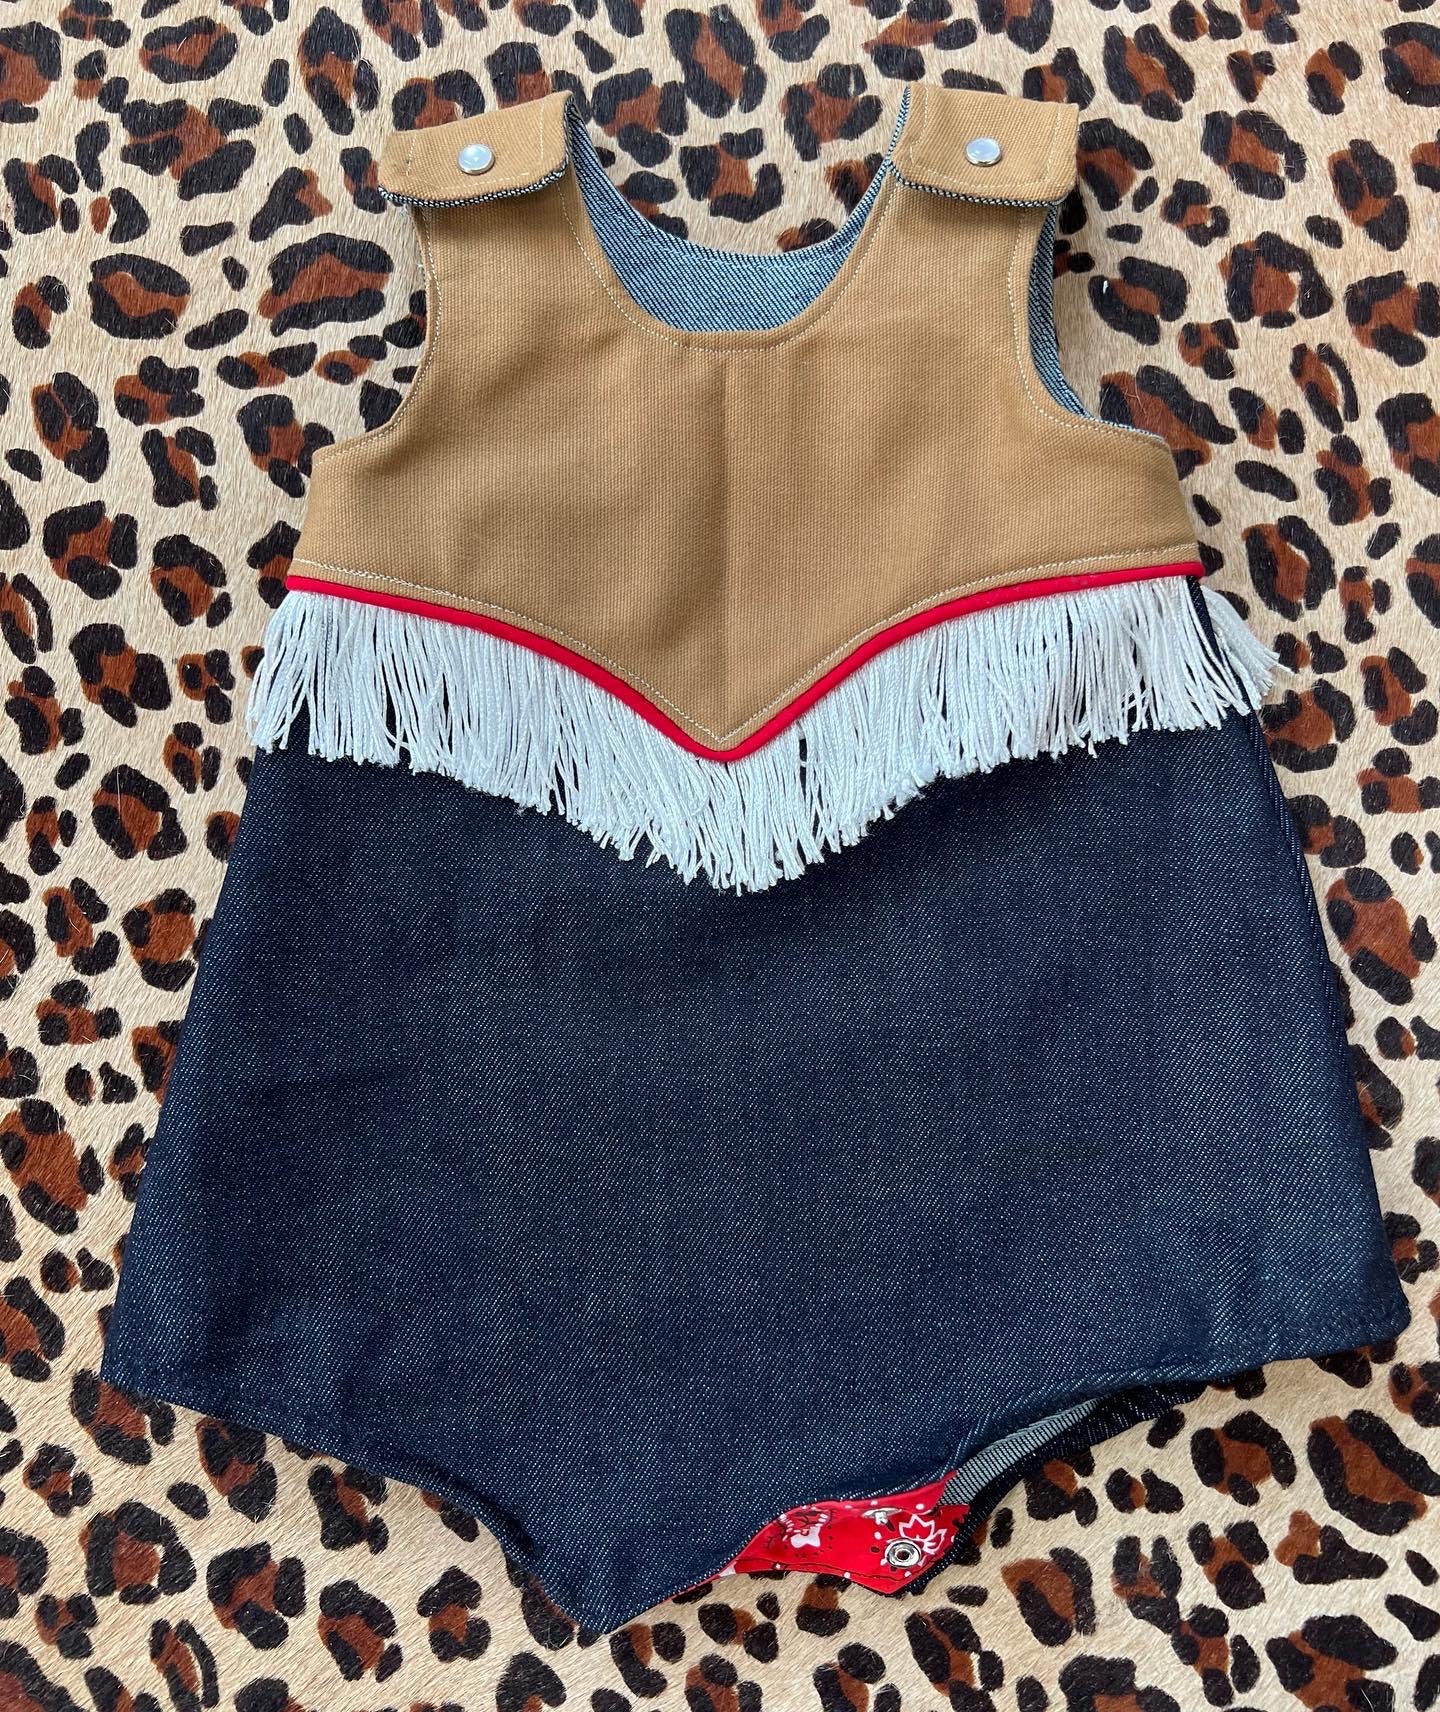 Little Darlin’ Baby to Toddler Western Pearl Snap Romper